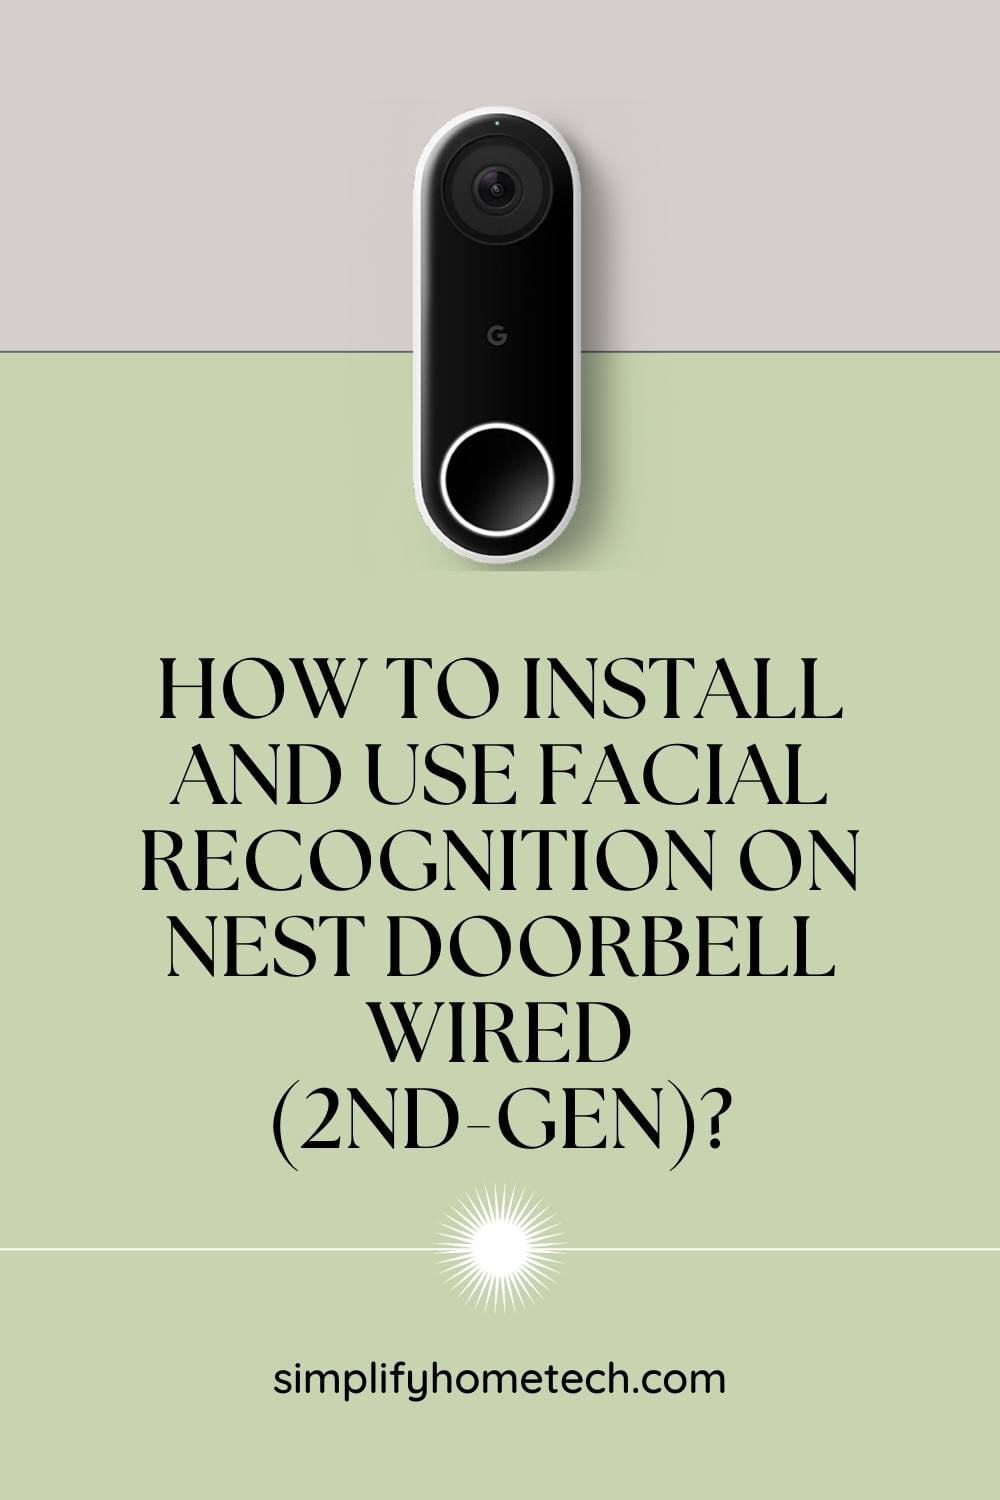 How to Install and Use Facial Recognition on Nest Doorbell Wired